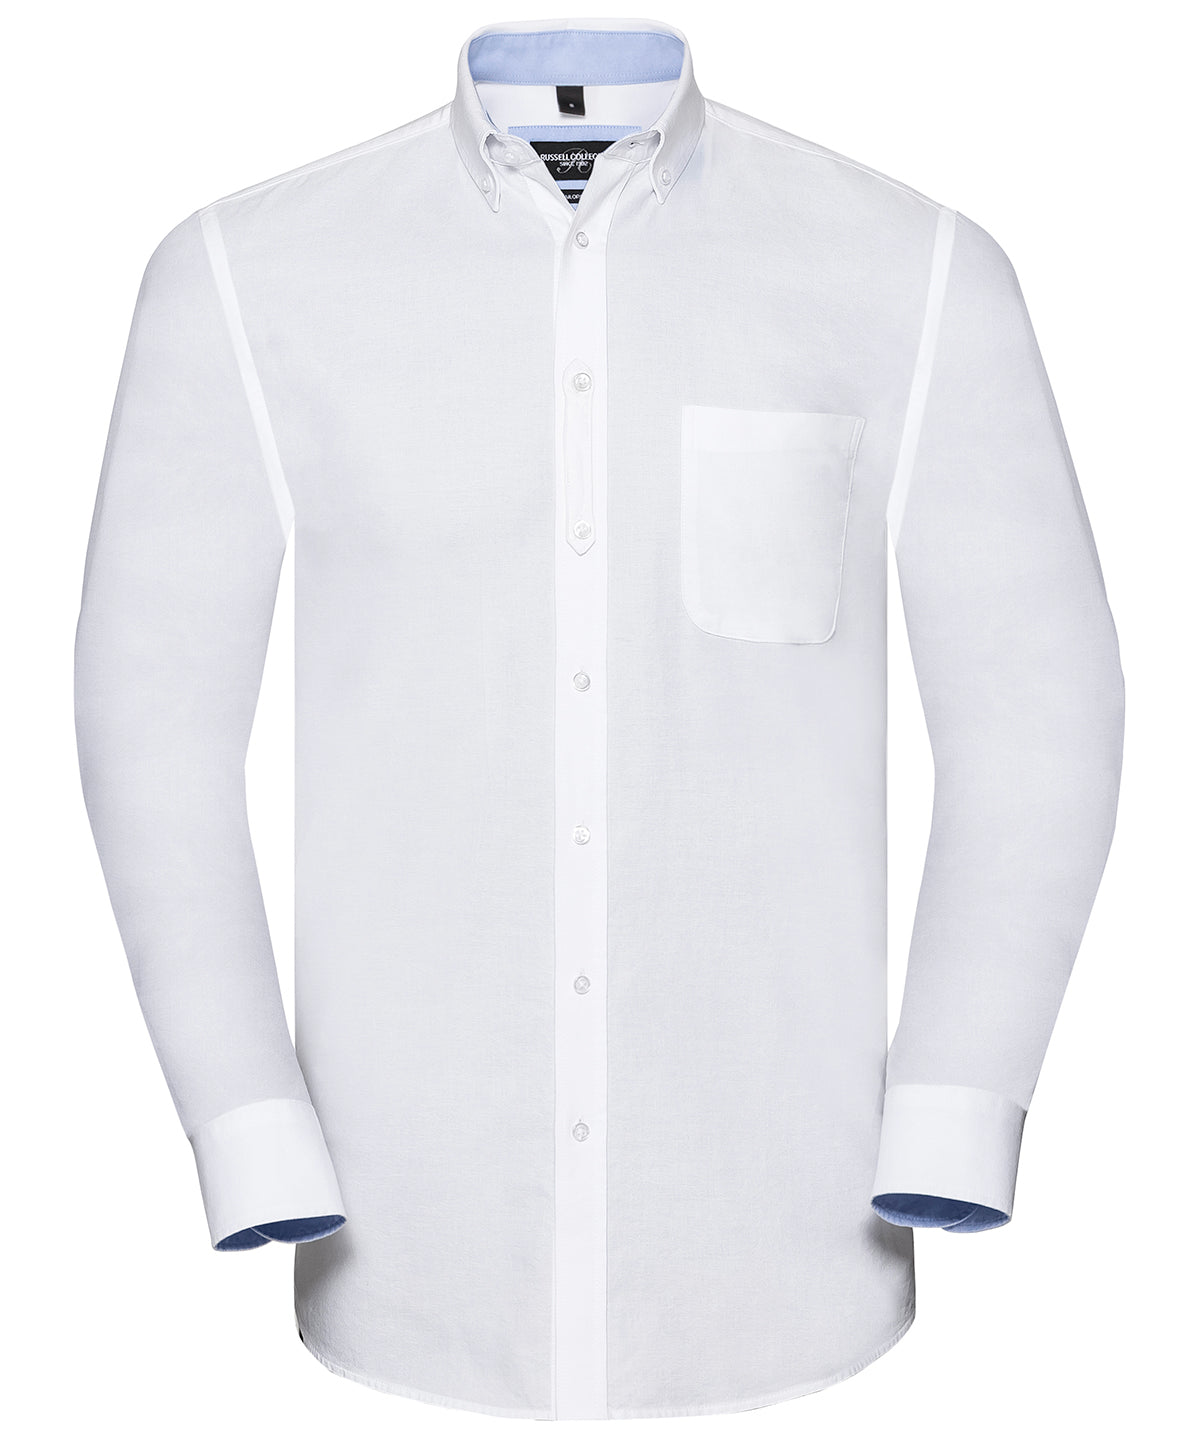 Bolir - Long Sleeve Tailored Washed Oxford Shirt